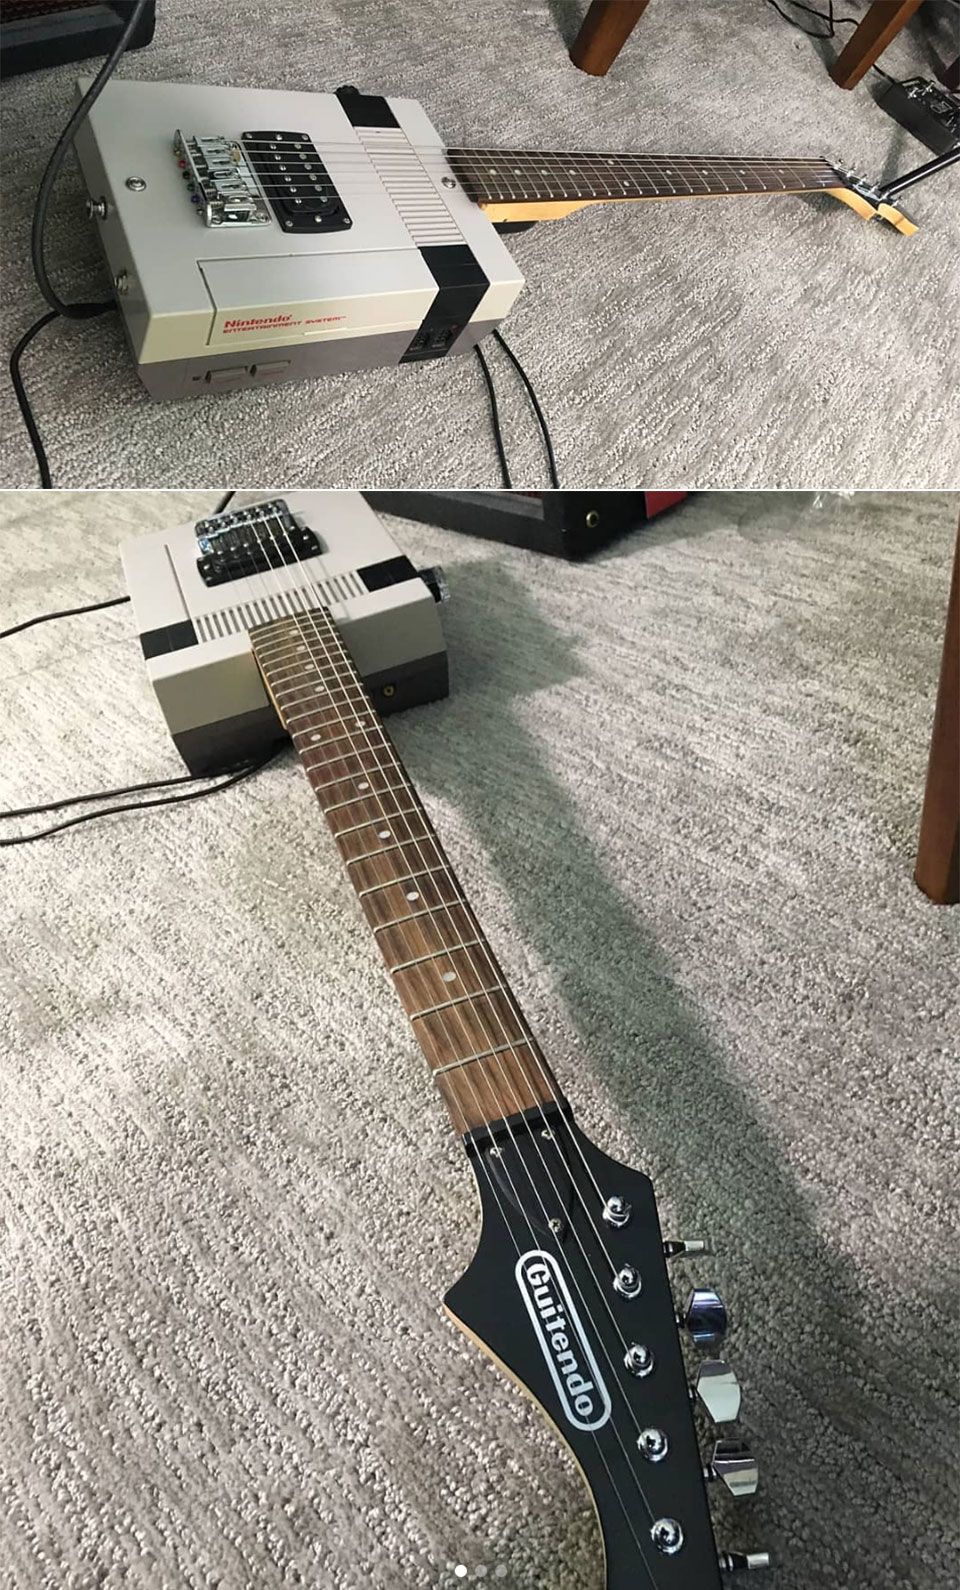 Person in charge Inca Empire thermometer Musician Uses Functional "Guitendo" Guitar Made from a Real NES to Play Super  Mario Bros. Theme - TechEBlog